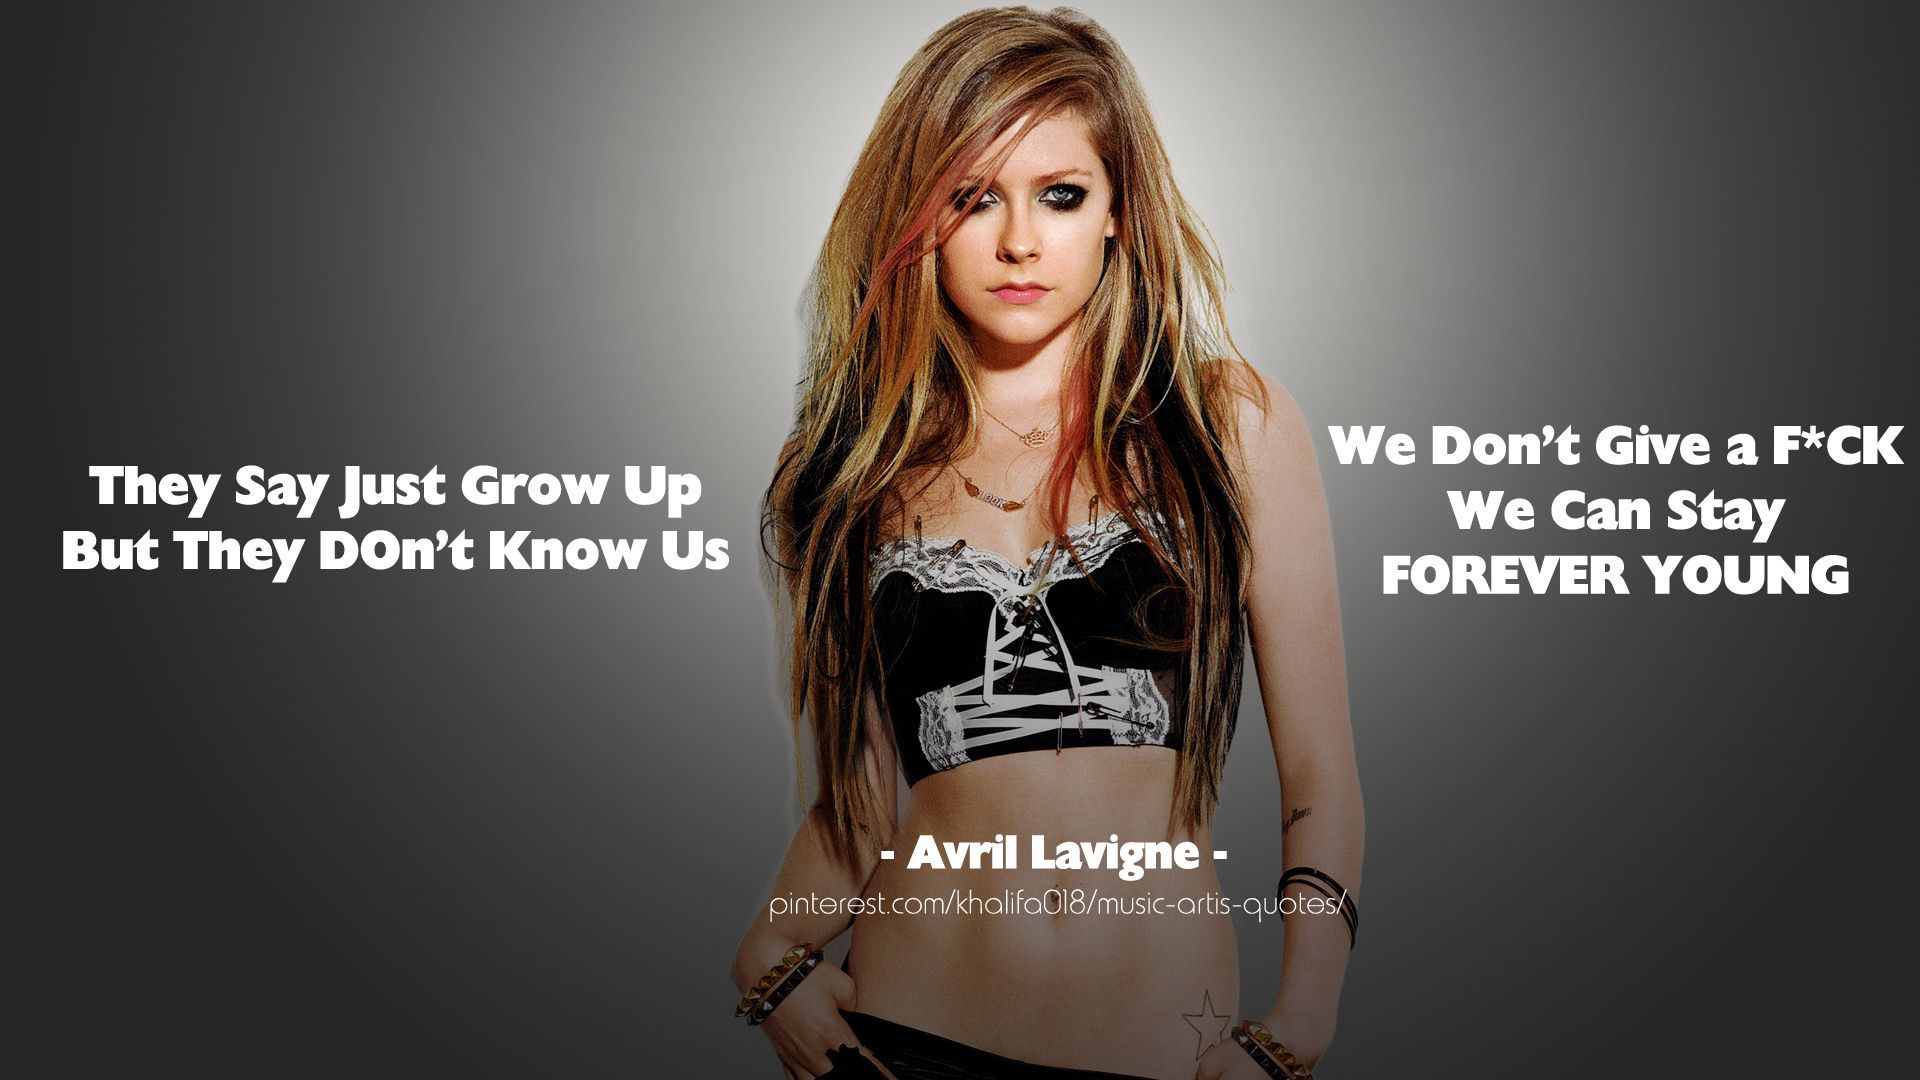 Avril Lavigne - Here's To Never Growing Up (Lyrics) 